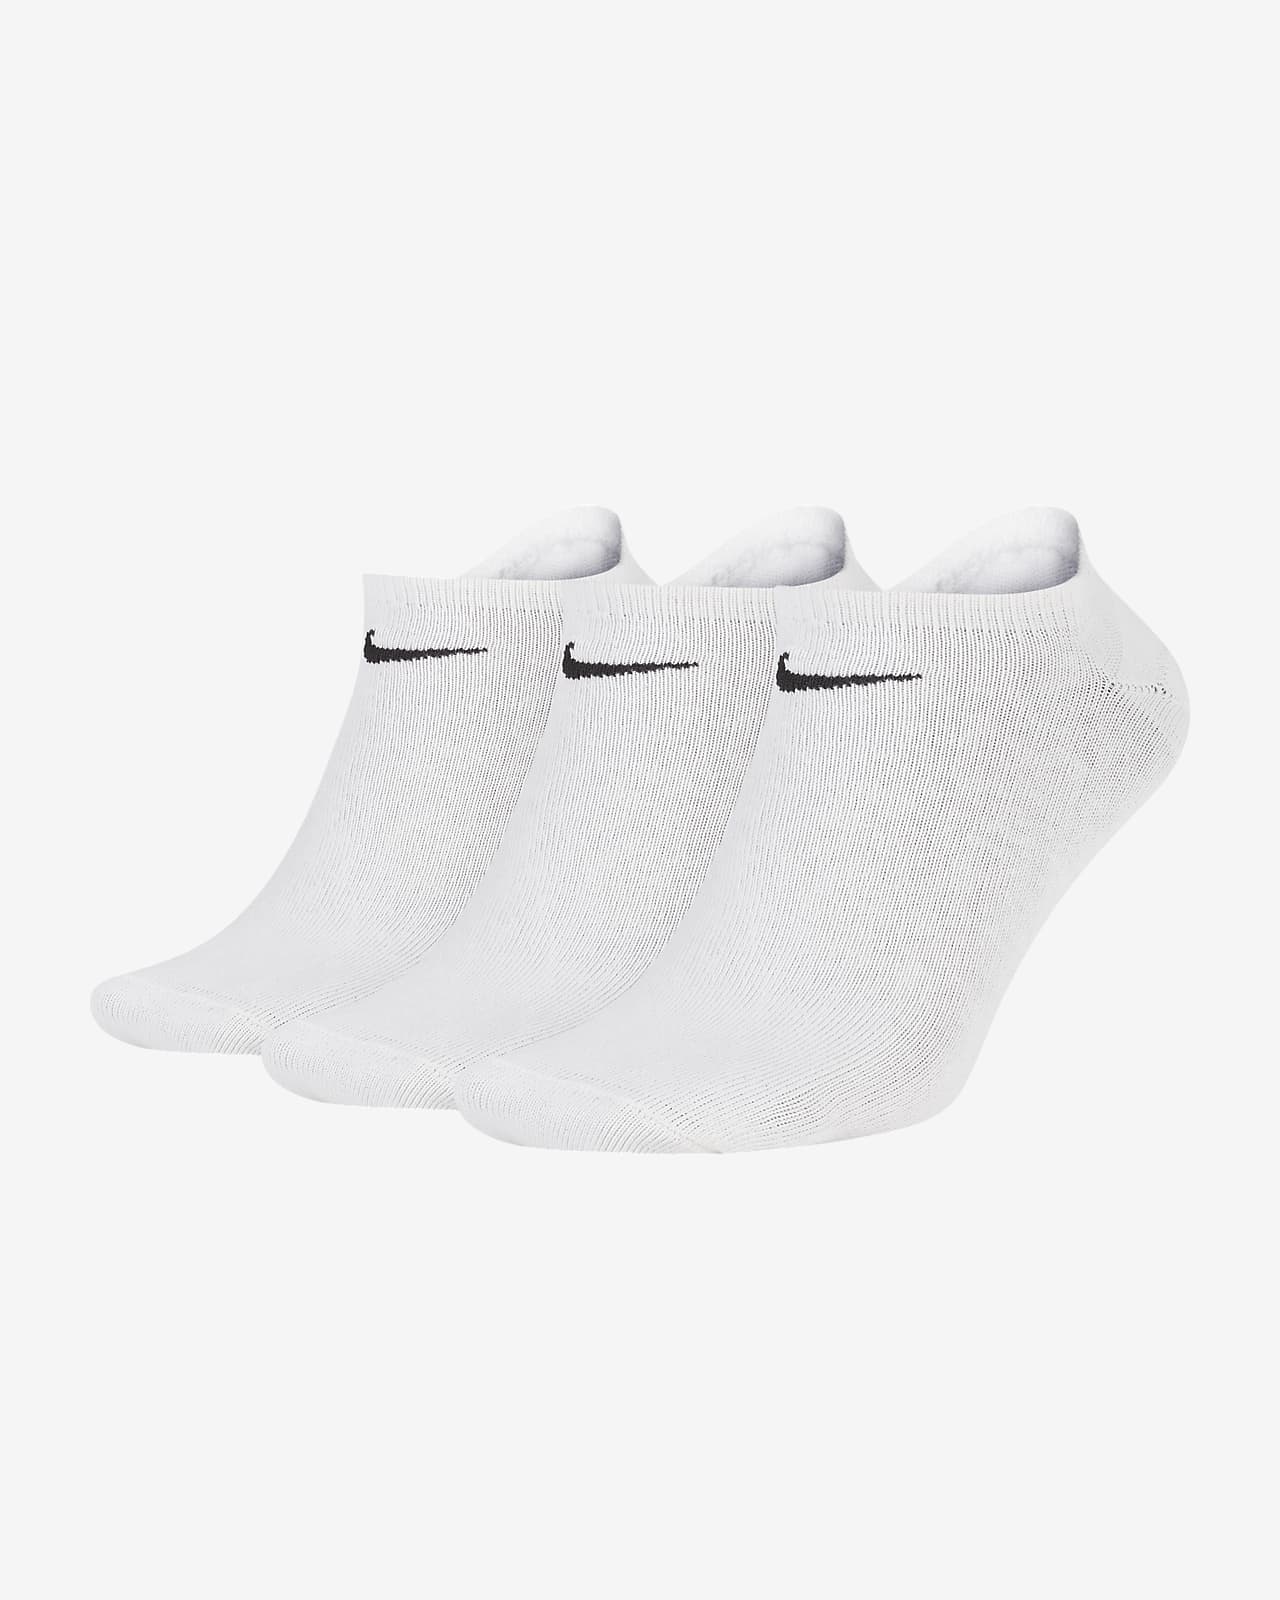 Chaussettes de training invisibles Nike Lightweight (3 paires)